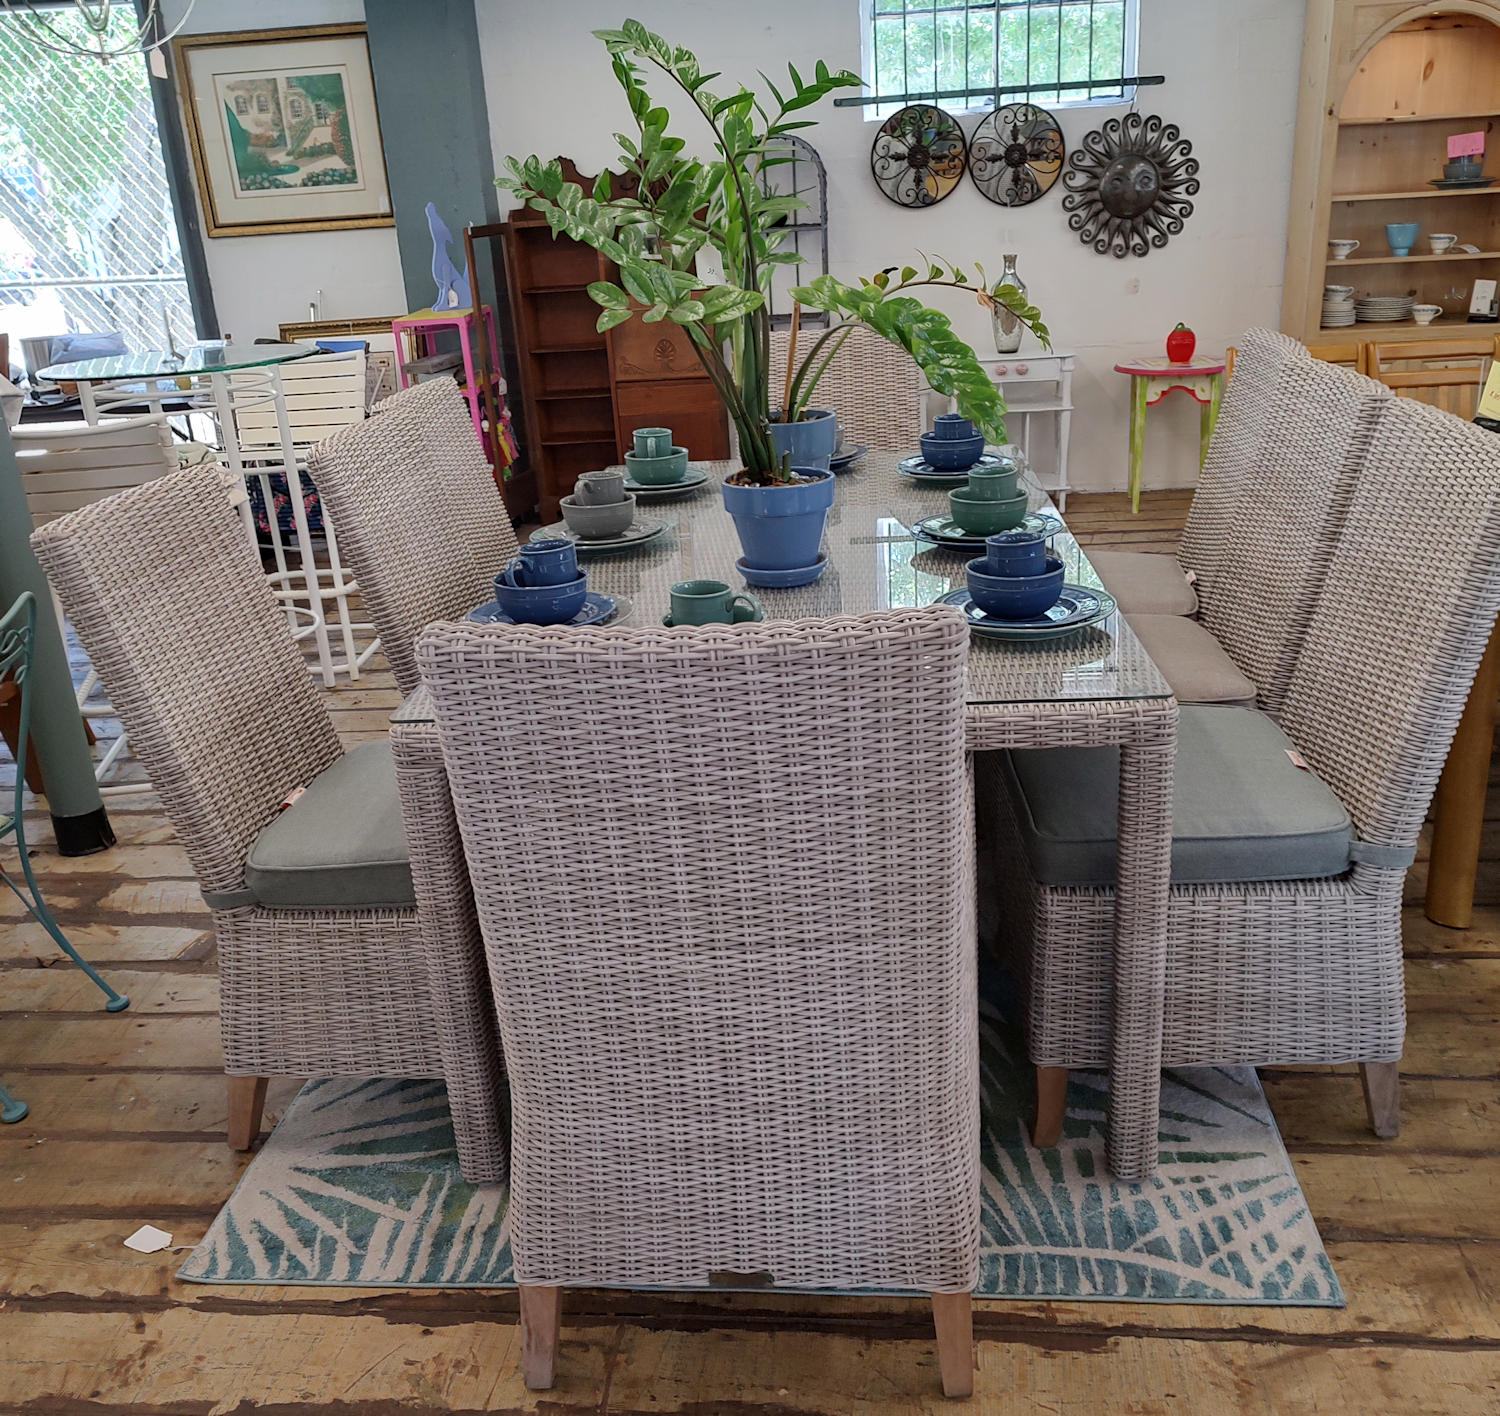 Fifth and Shore Dining Set